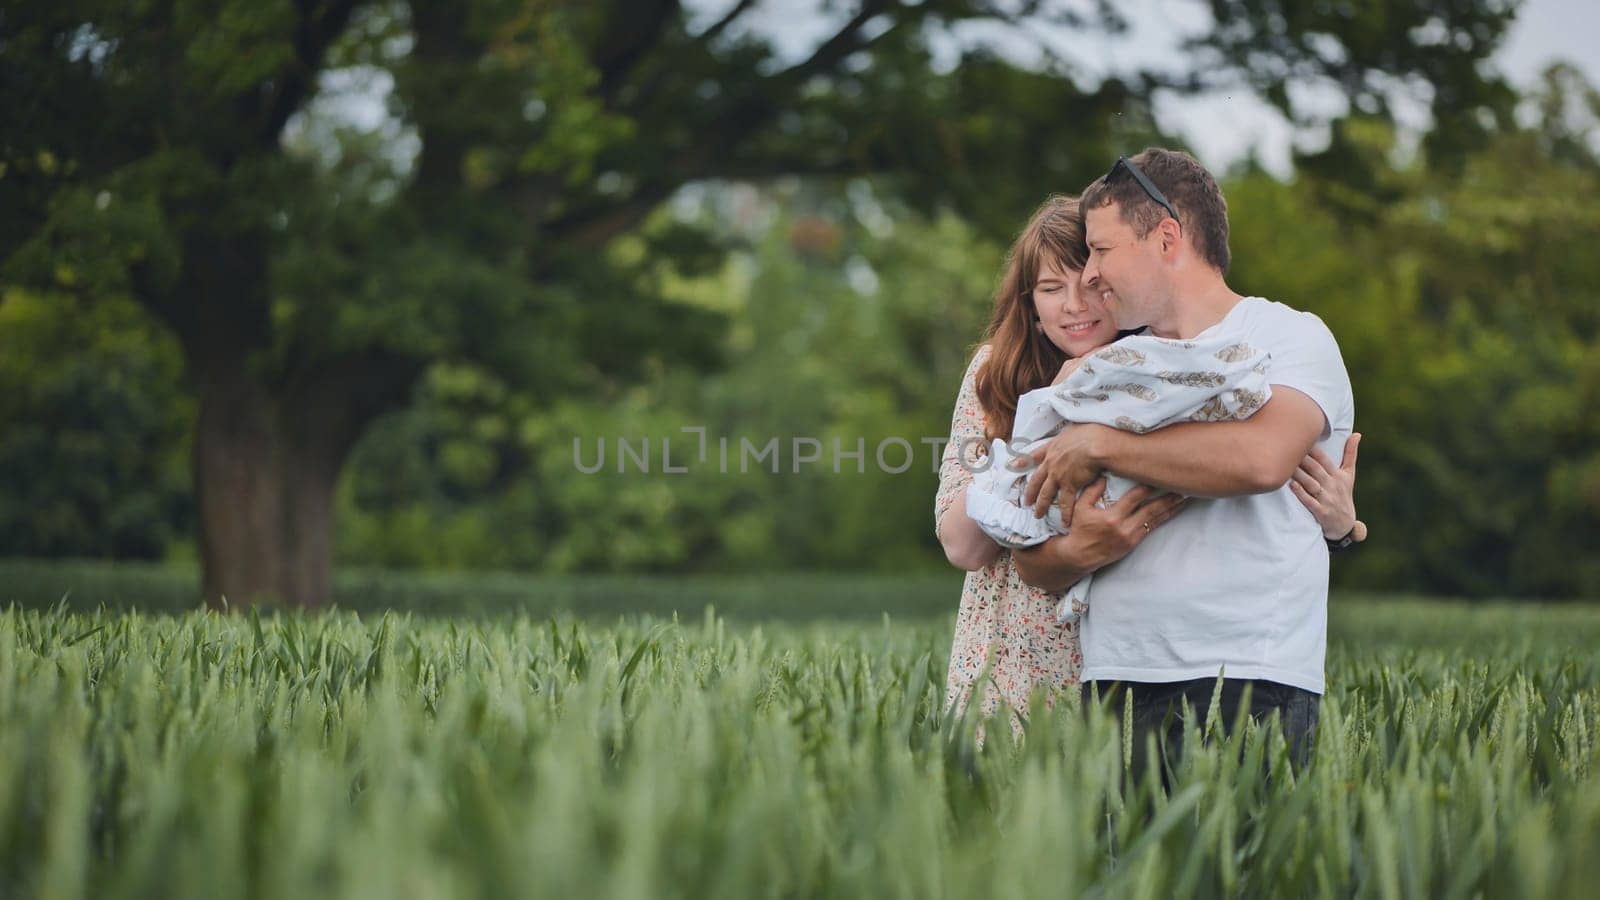 A young couple with their newborn baby in green wheat in a field